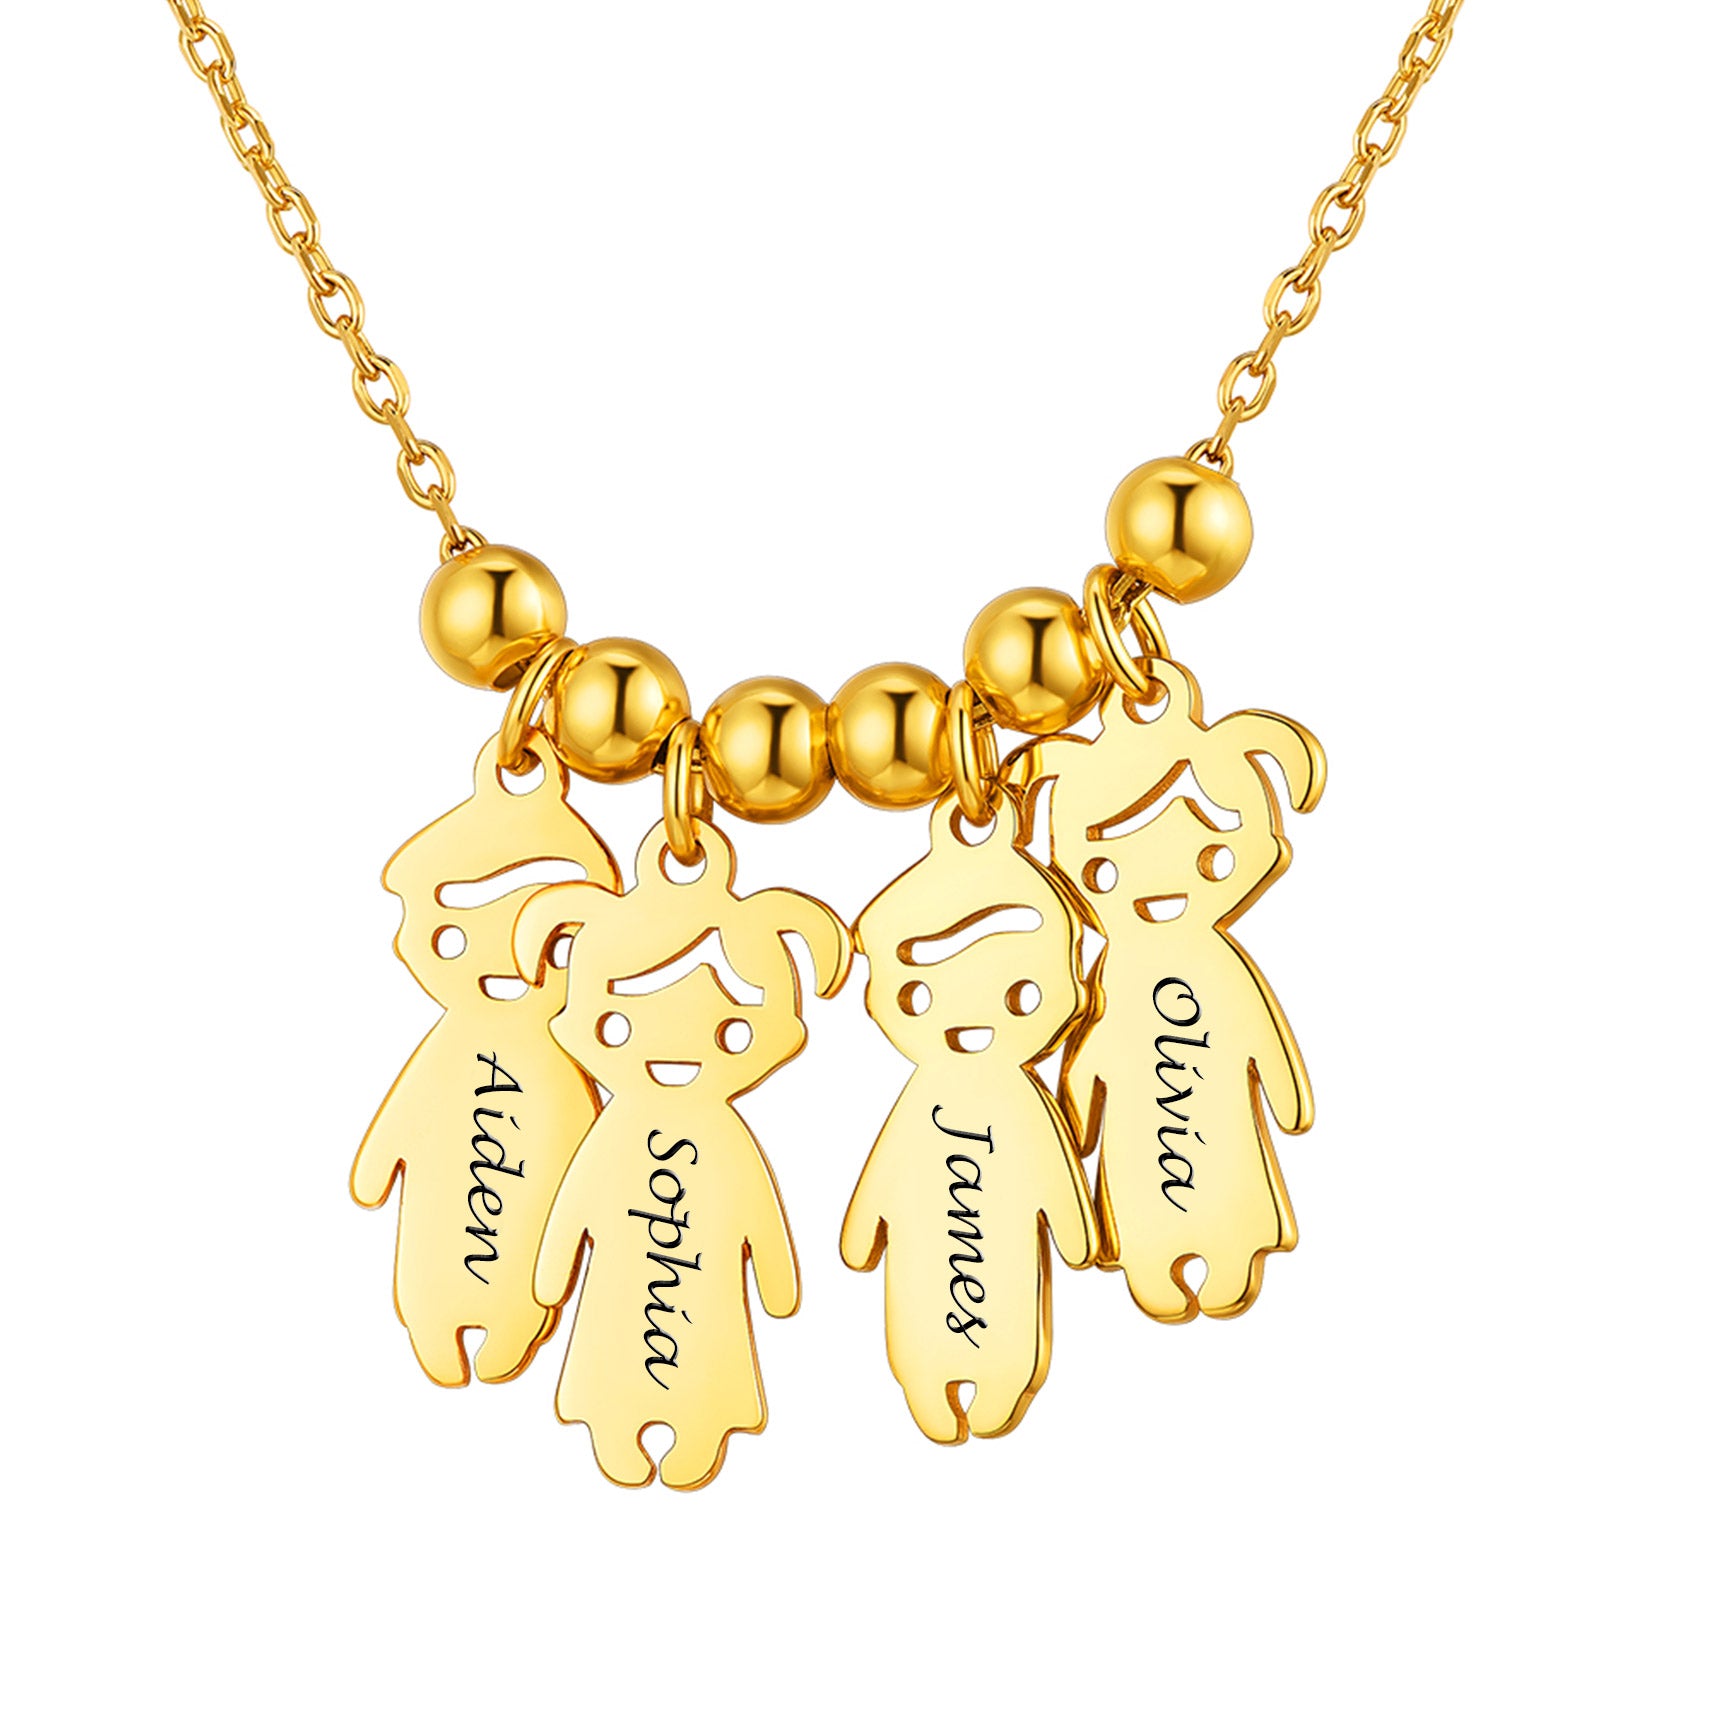 4 children necklace for mom gold